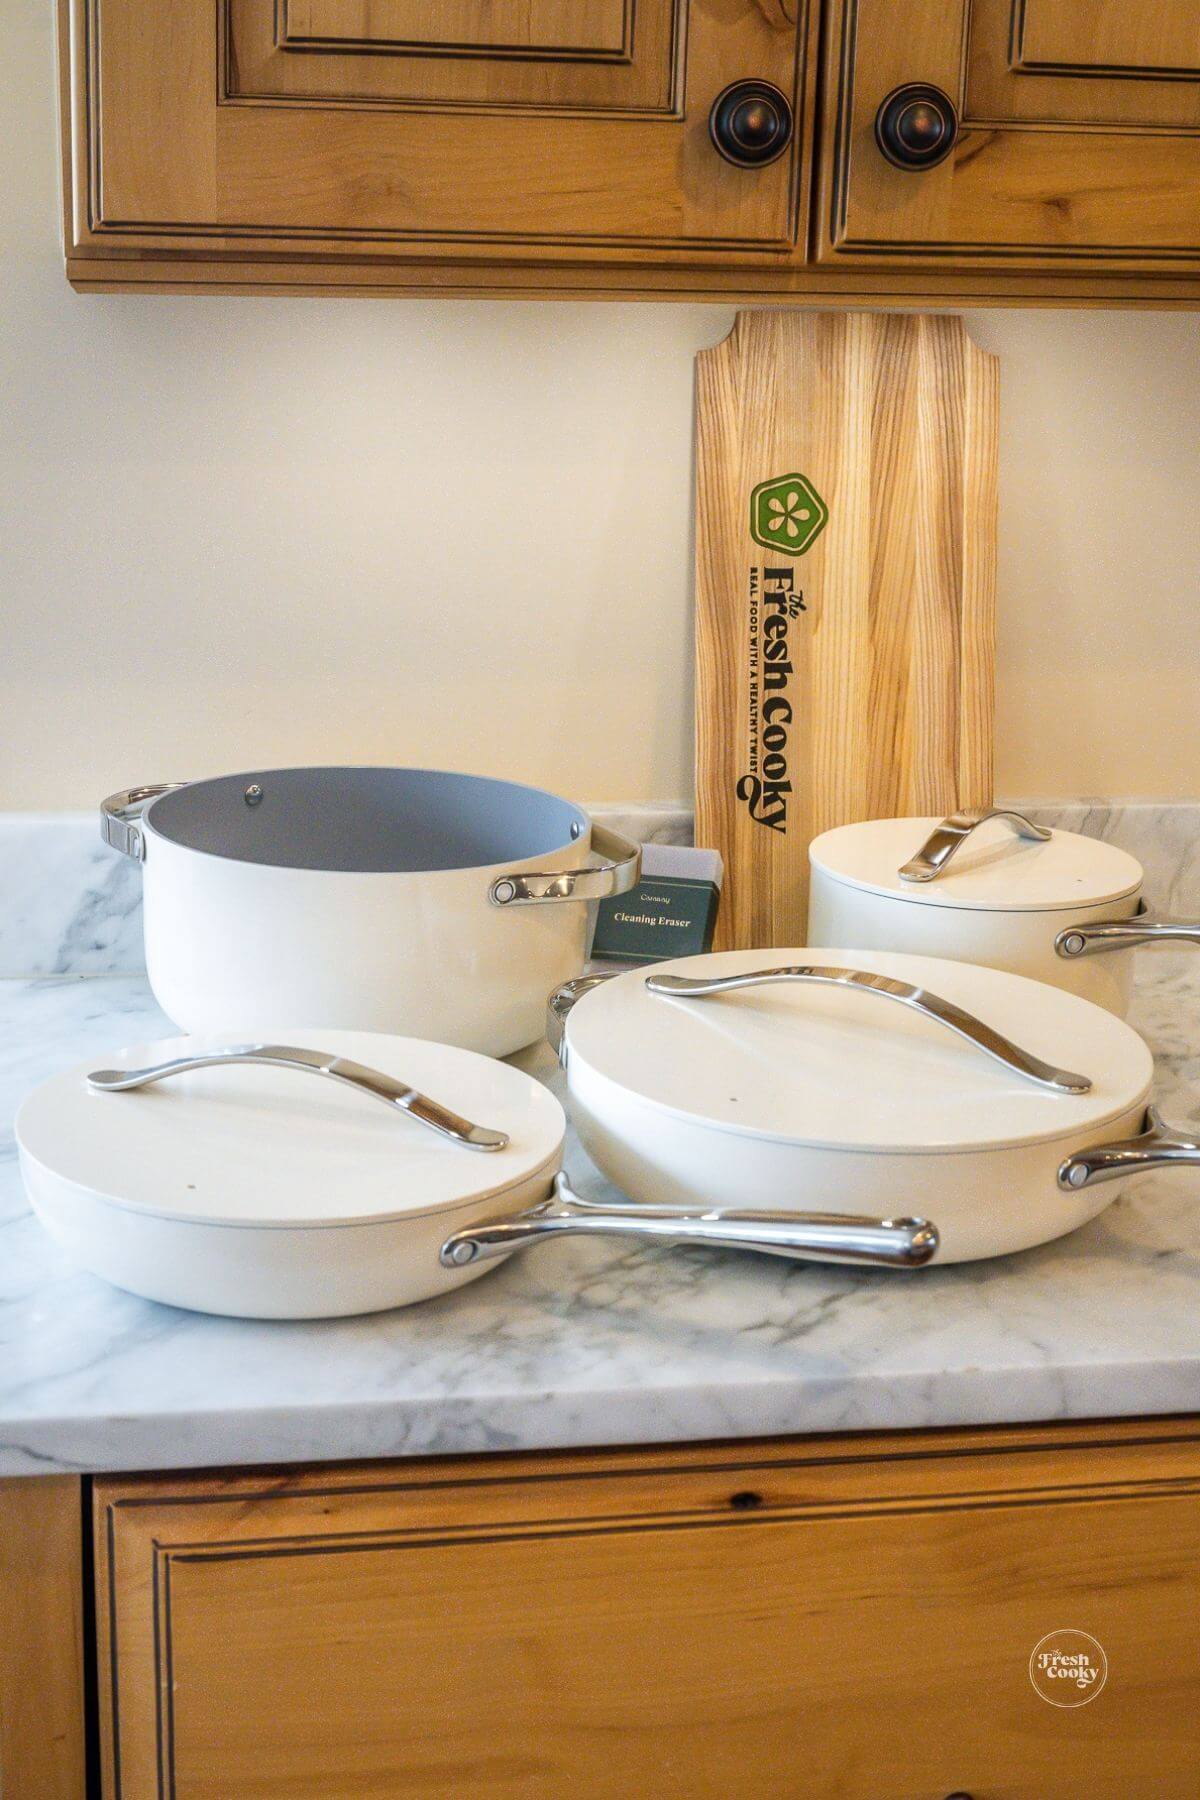 A Balanced Caraway Cookware Review from a Frugal Mom